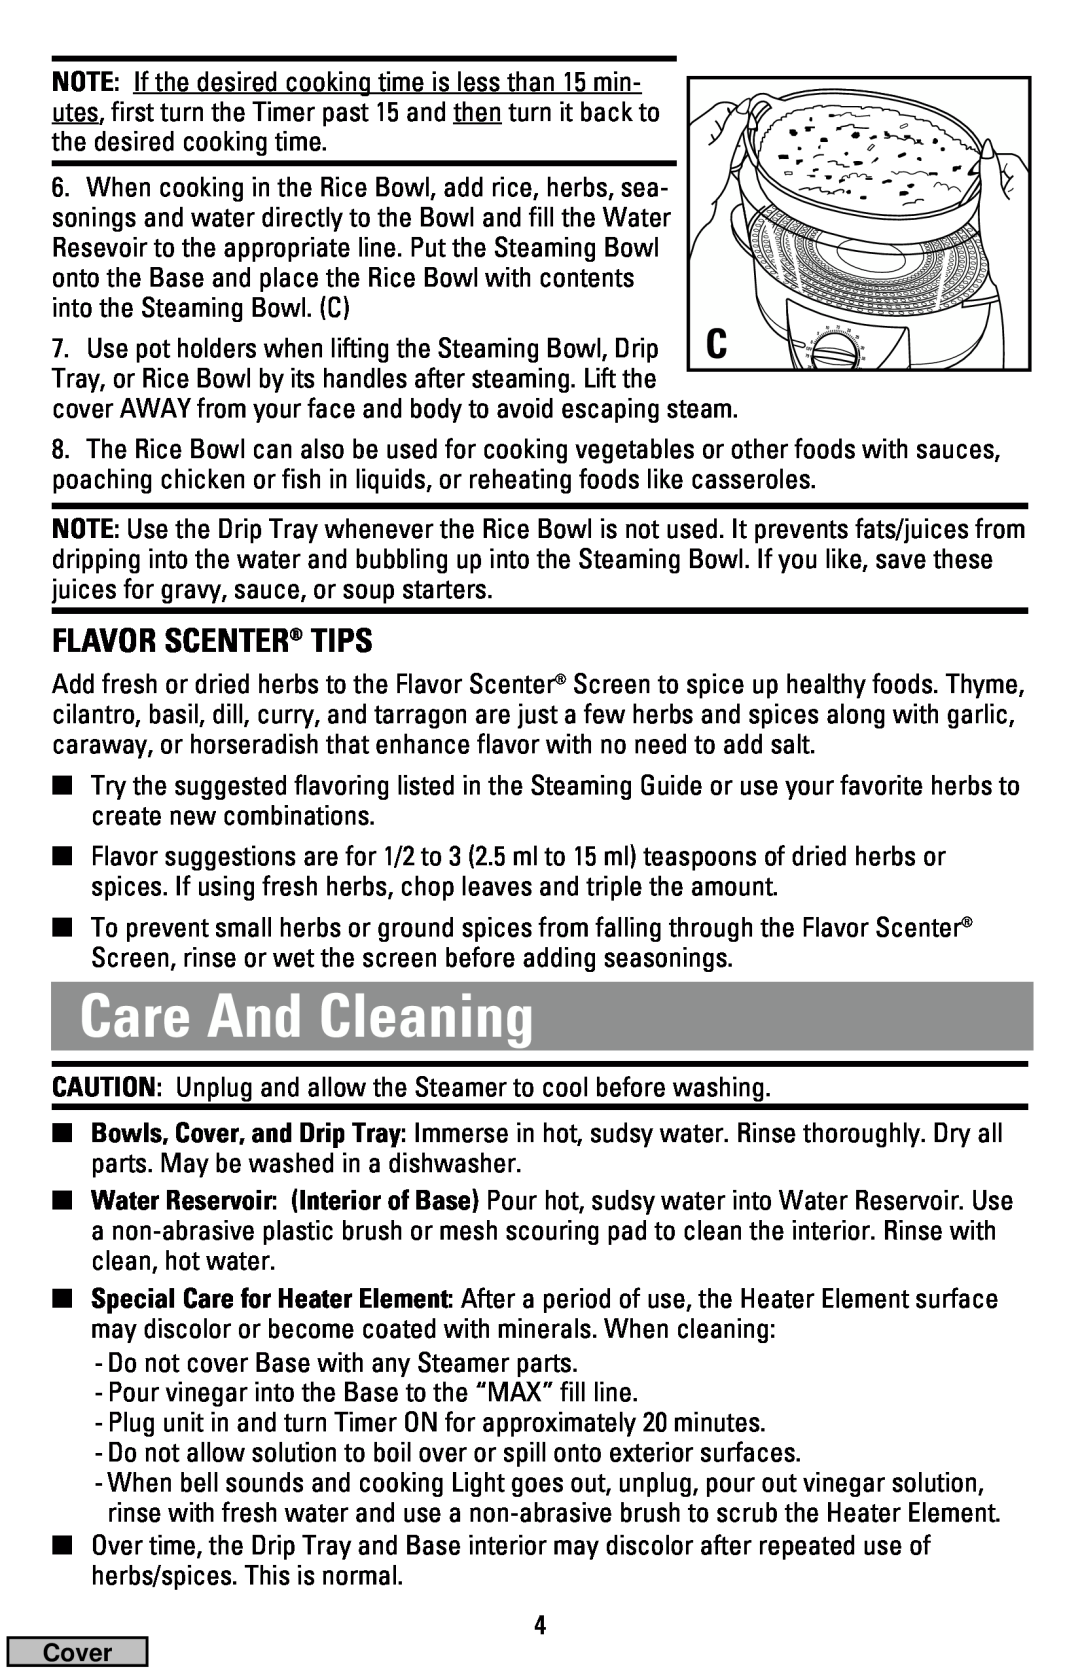 Black & Decker HS1776, HS2000 manual Care And Cleaning, Flavor Scenter Tips 